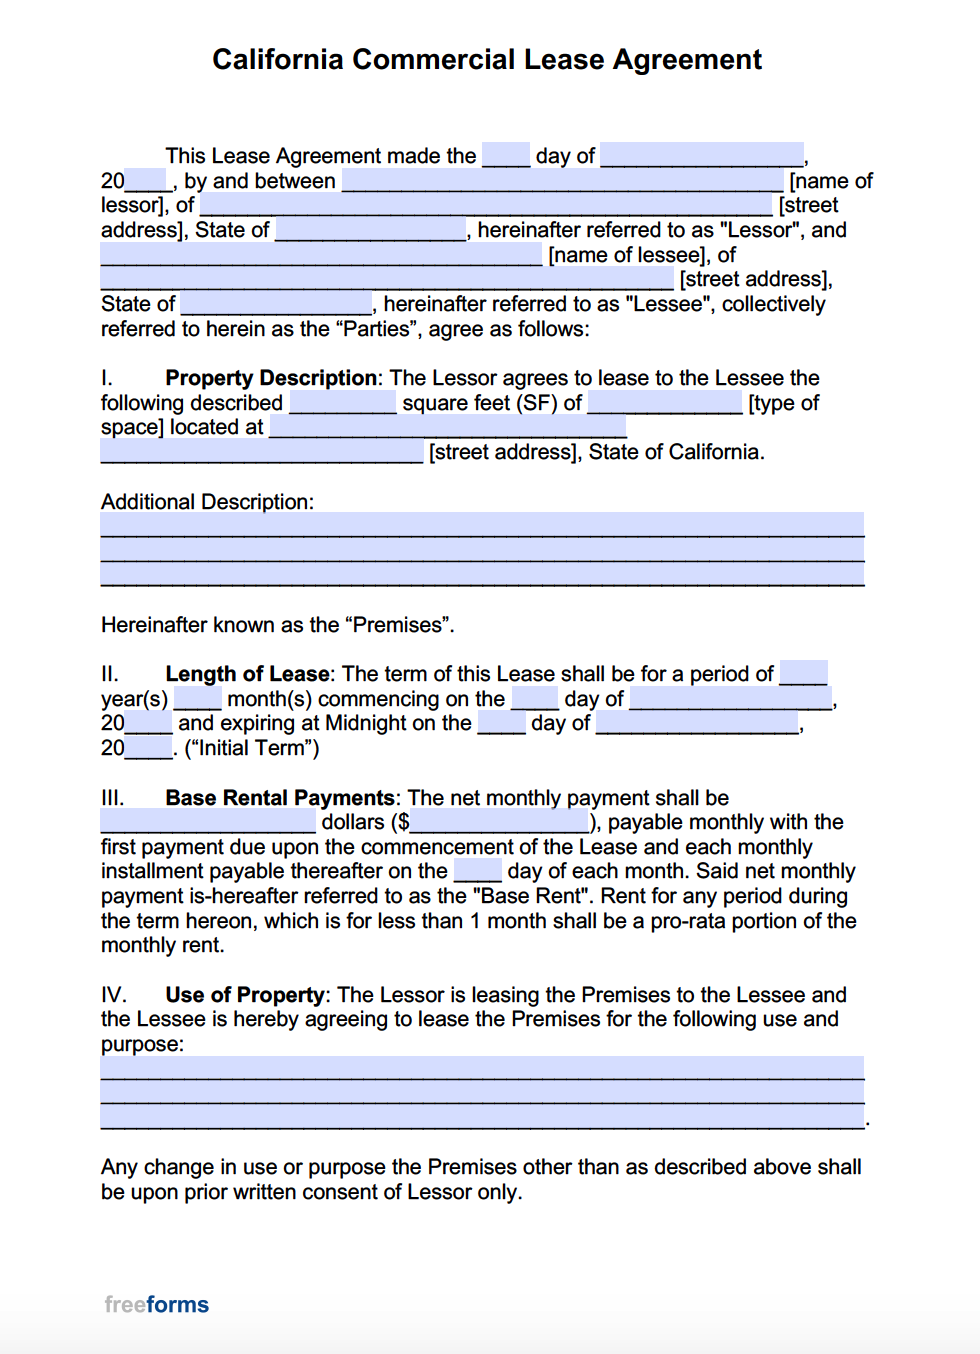 Free California Commercial Lease Agreement Template  PDF  WORD With free printable commercial lease agreement template